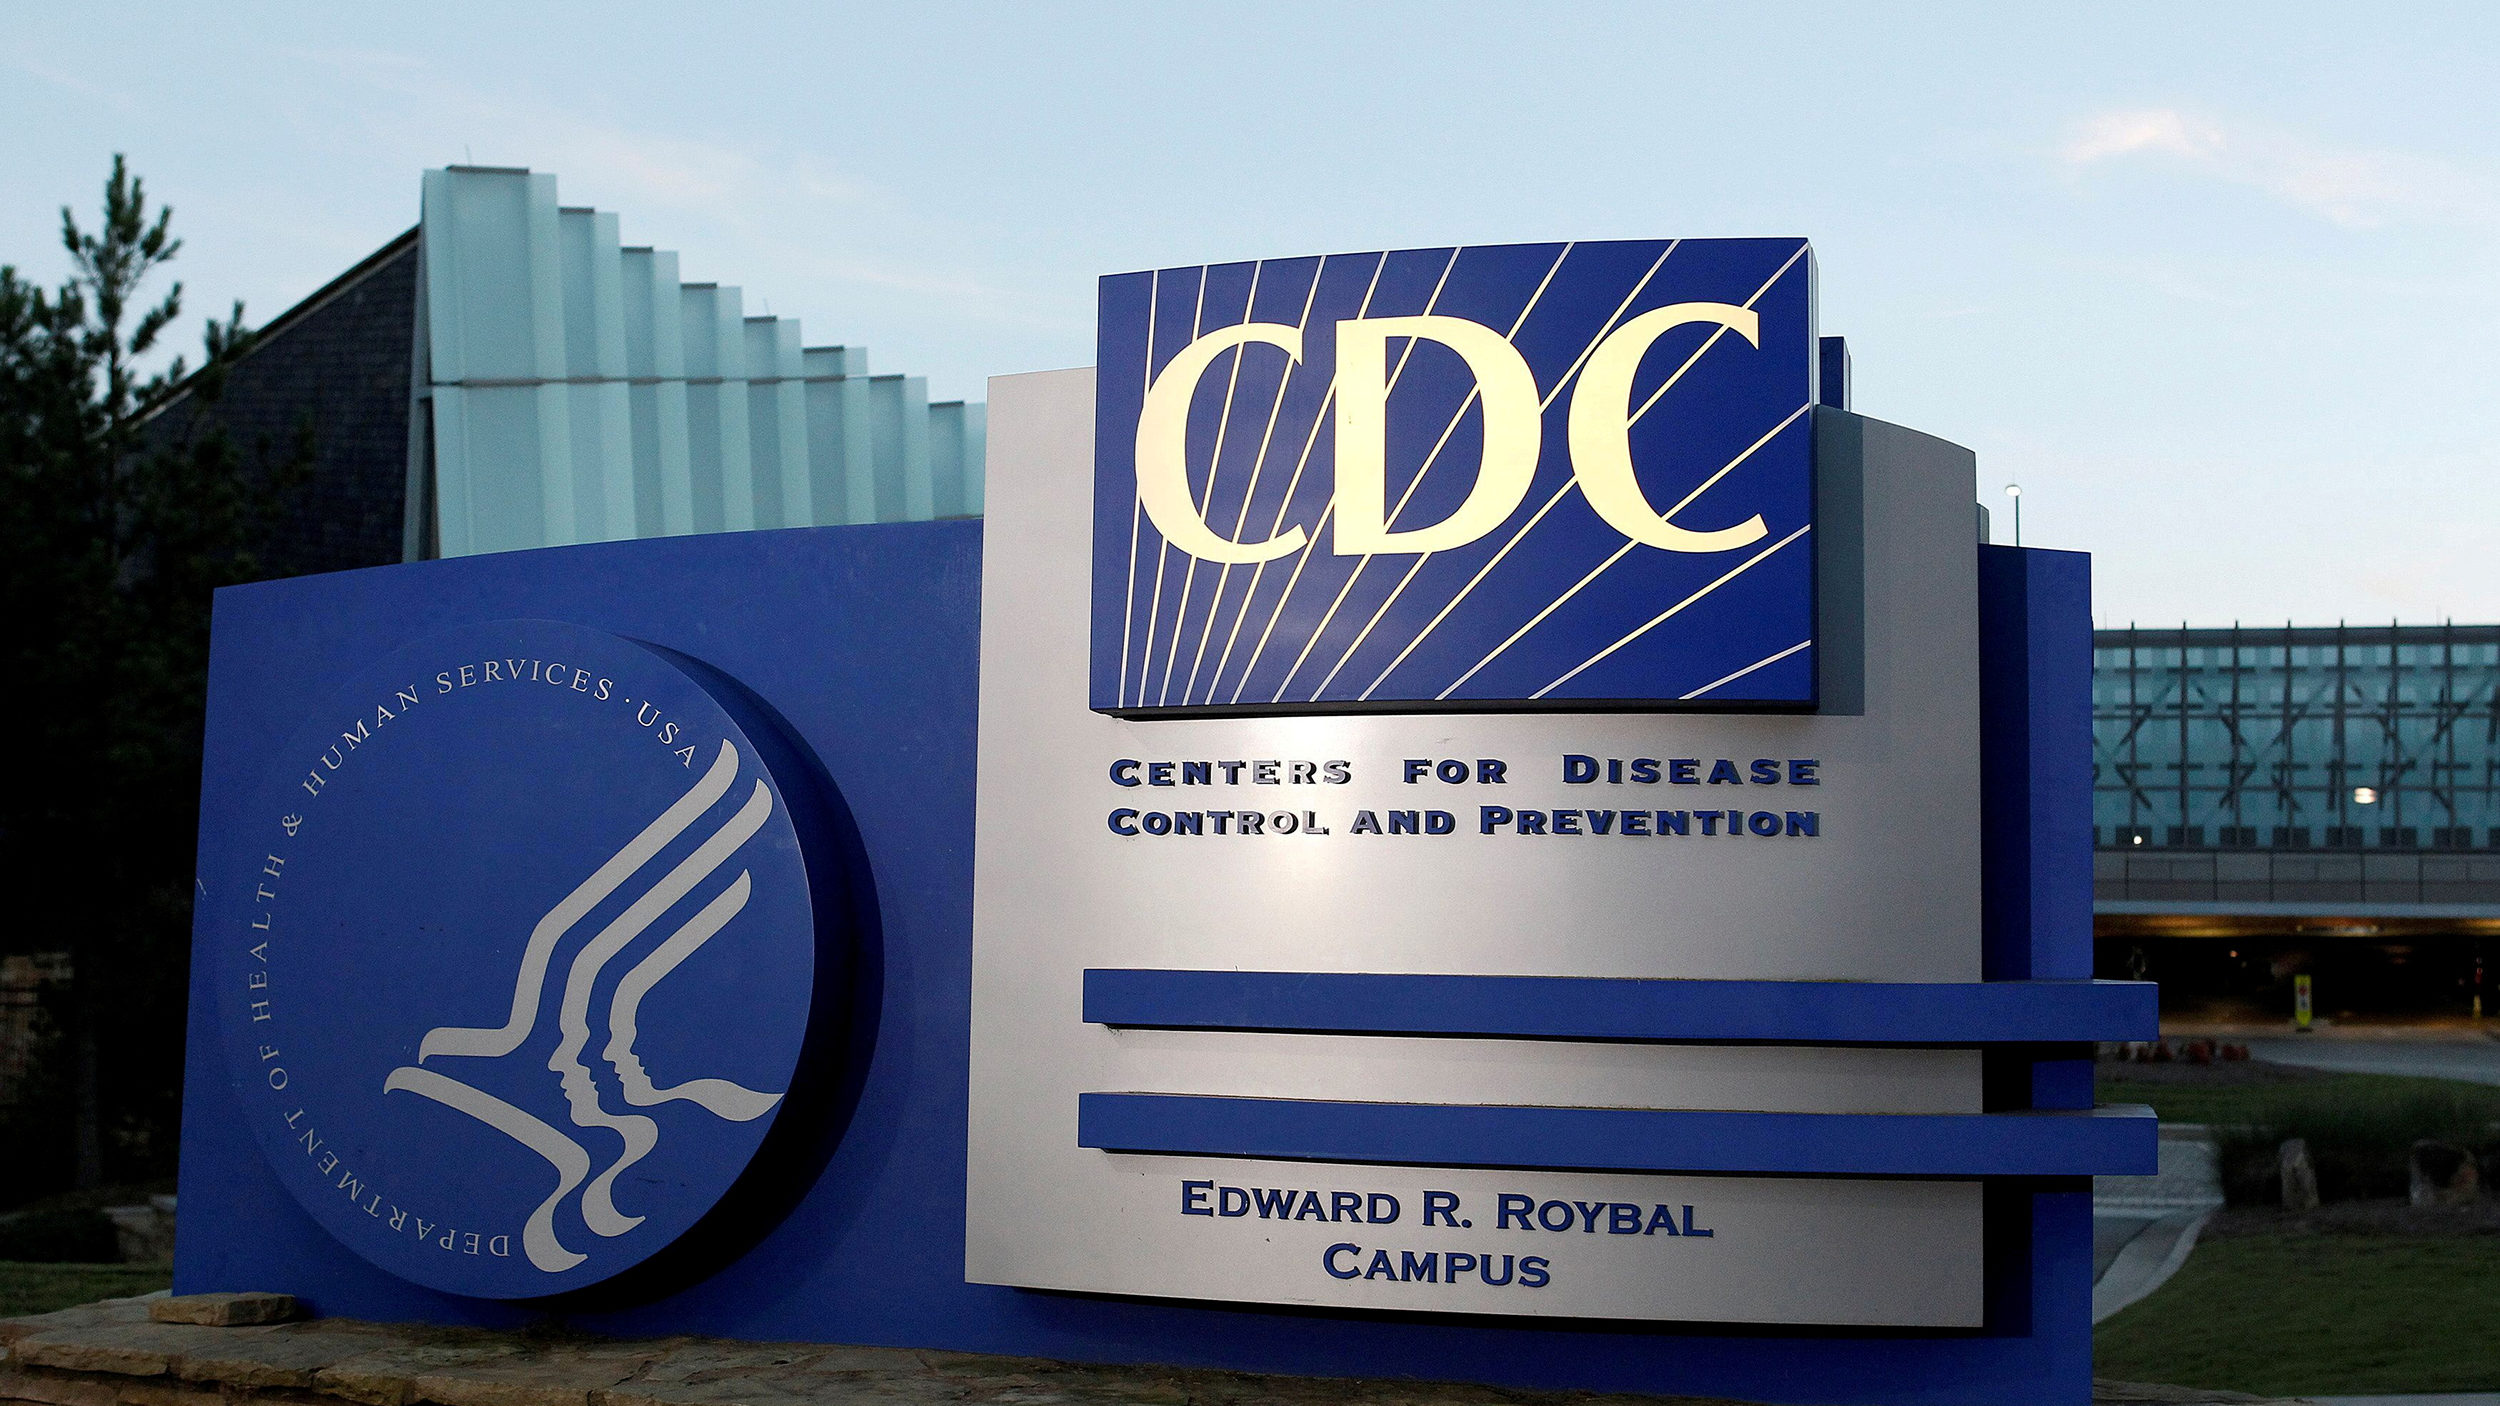 The US Centers for Disease Control and Prevention (CDC) needs a reset, and is in "a moment of peril...